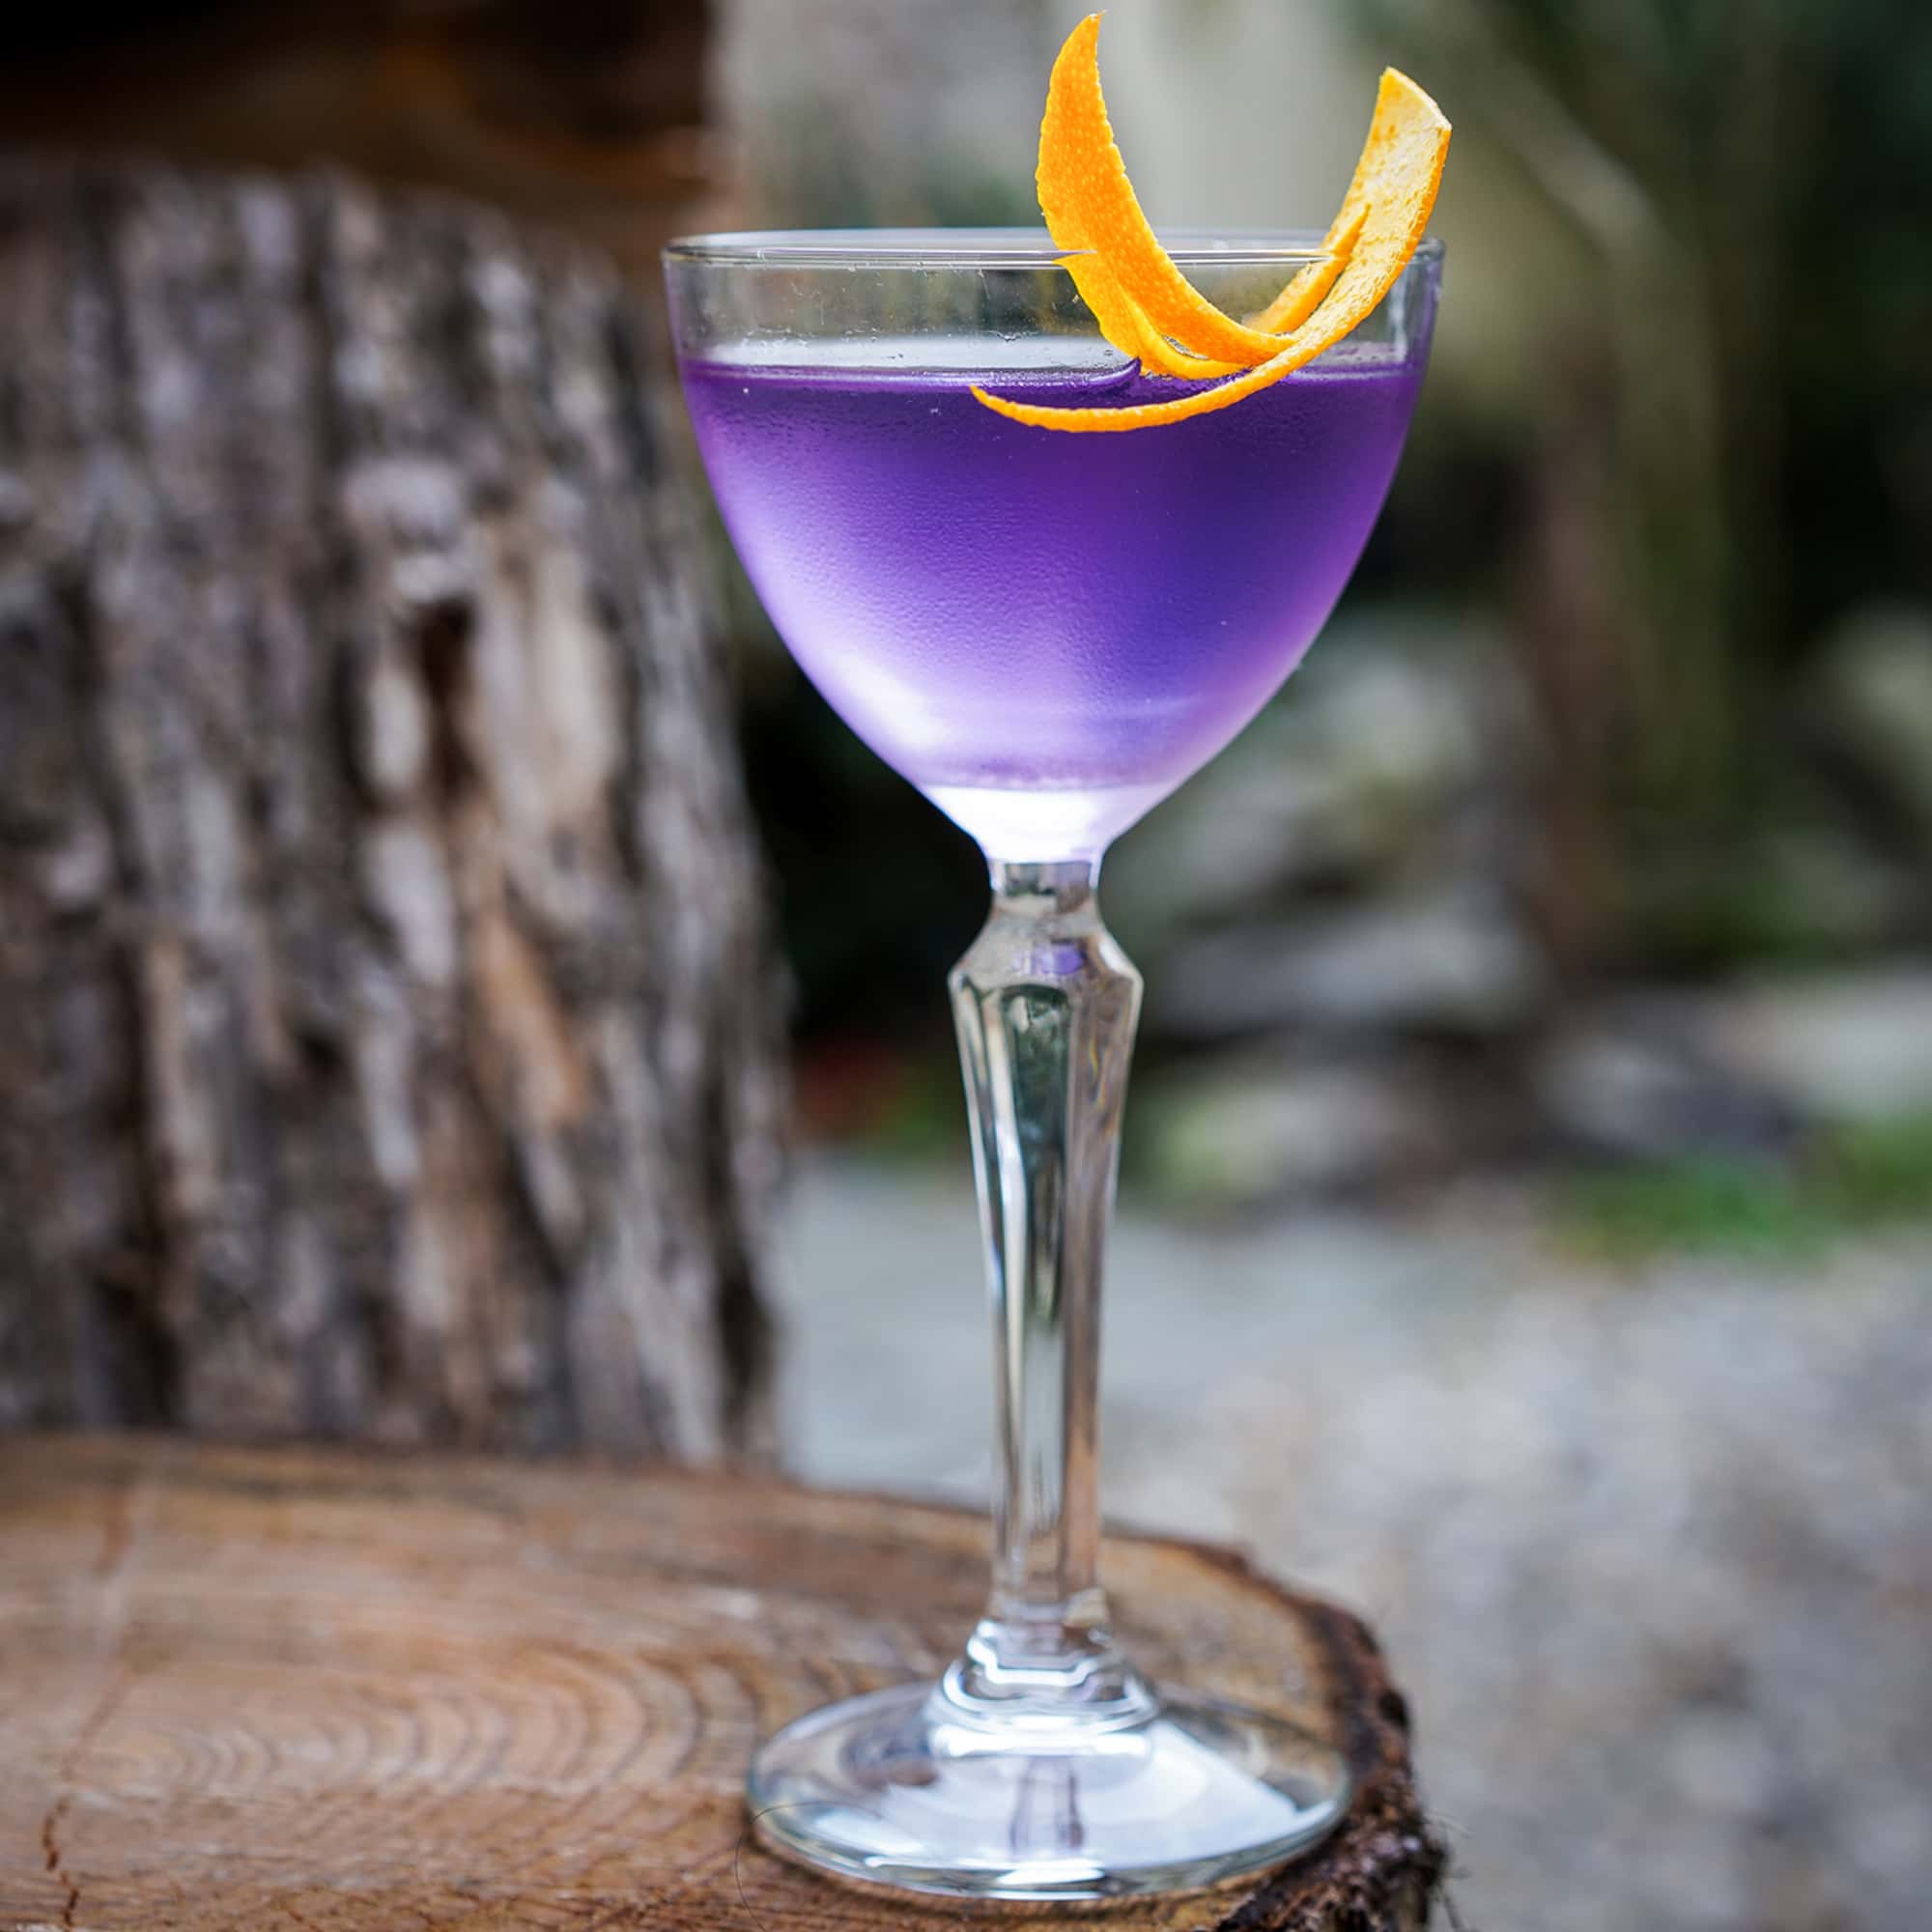 A cocktail with a lavendar hue and a citrus garnish.